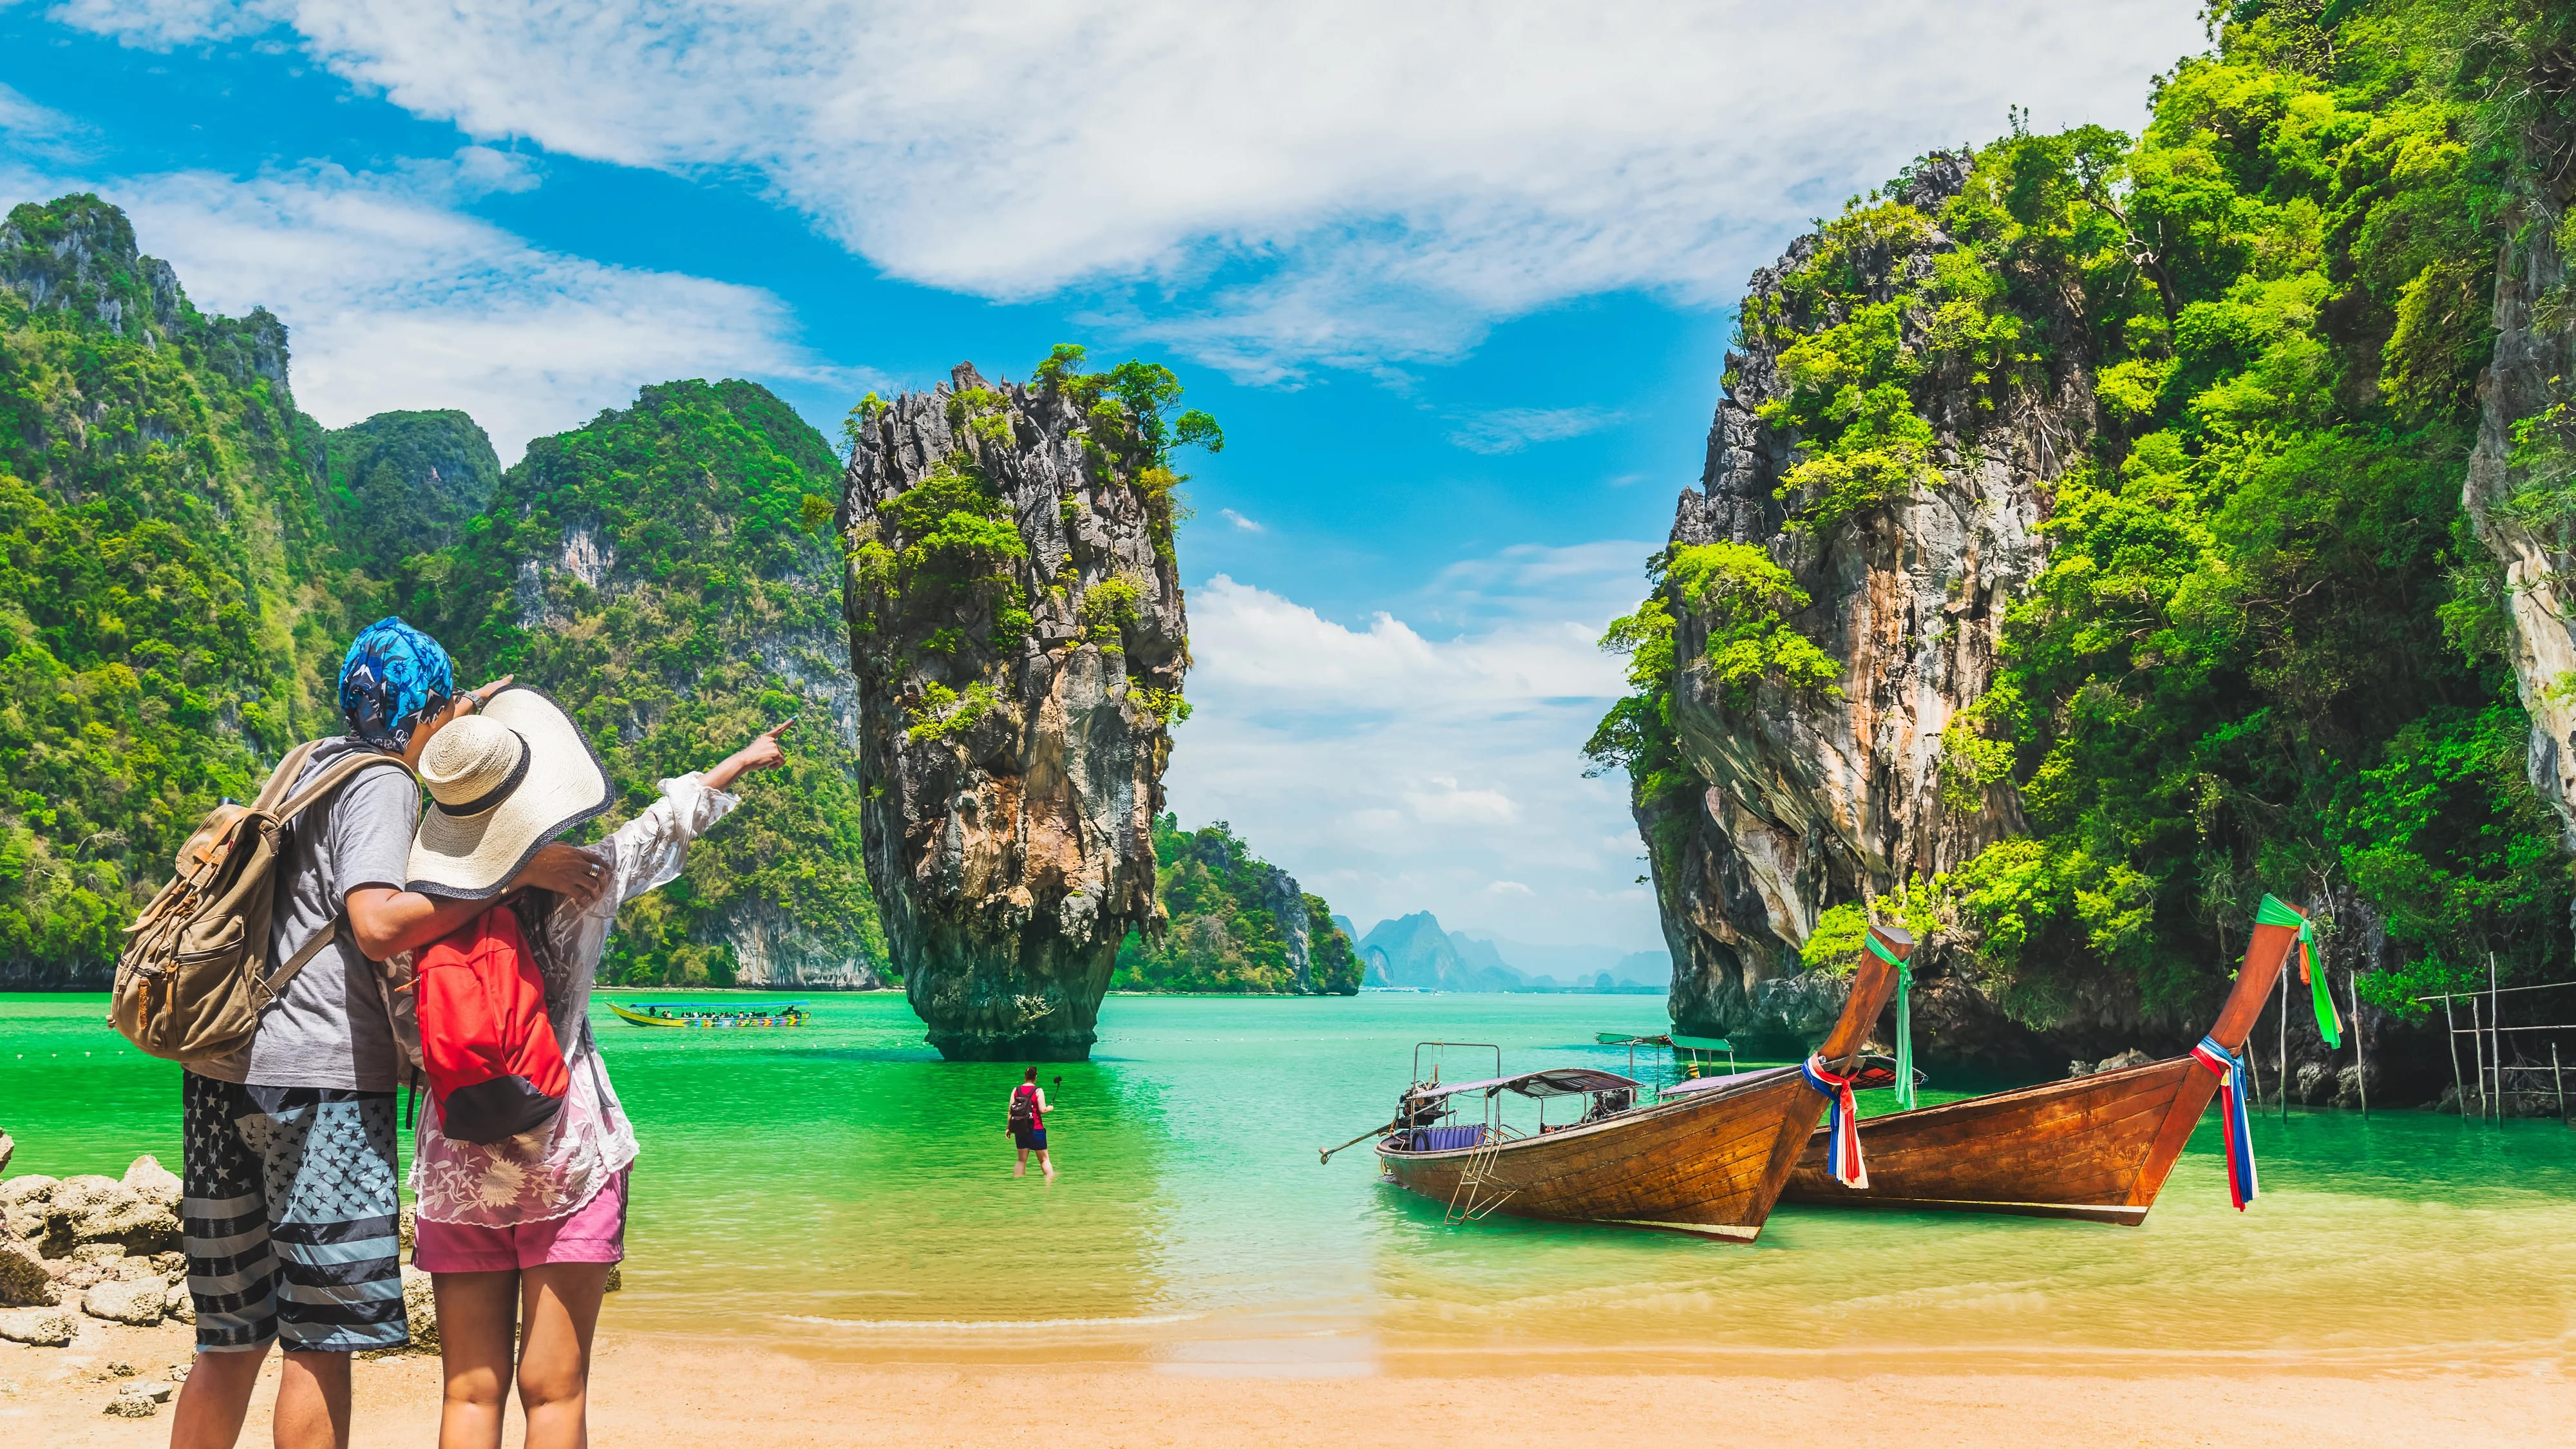 Join this fun trip to Hong Island from Krabi